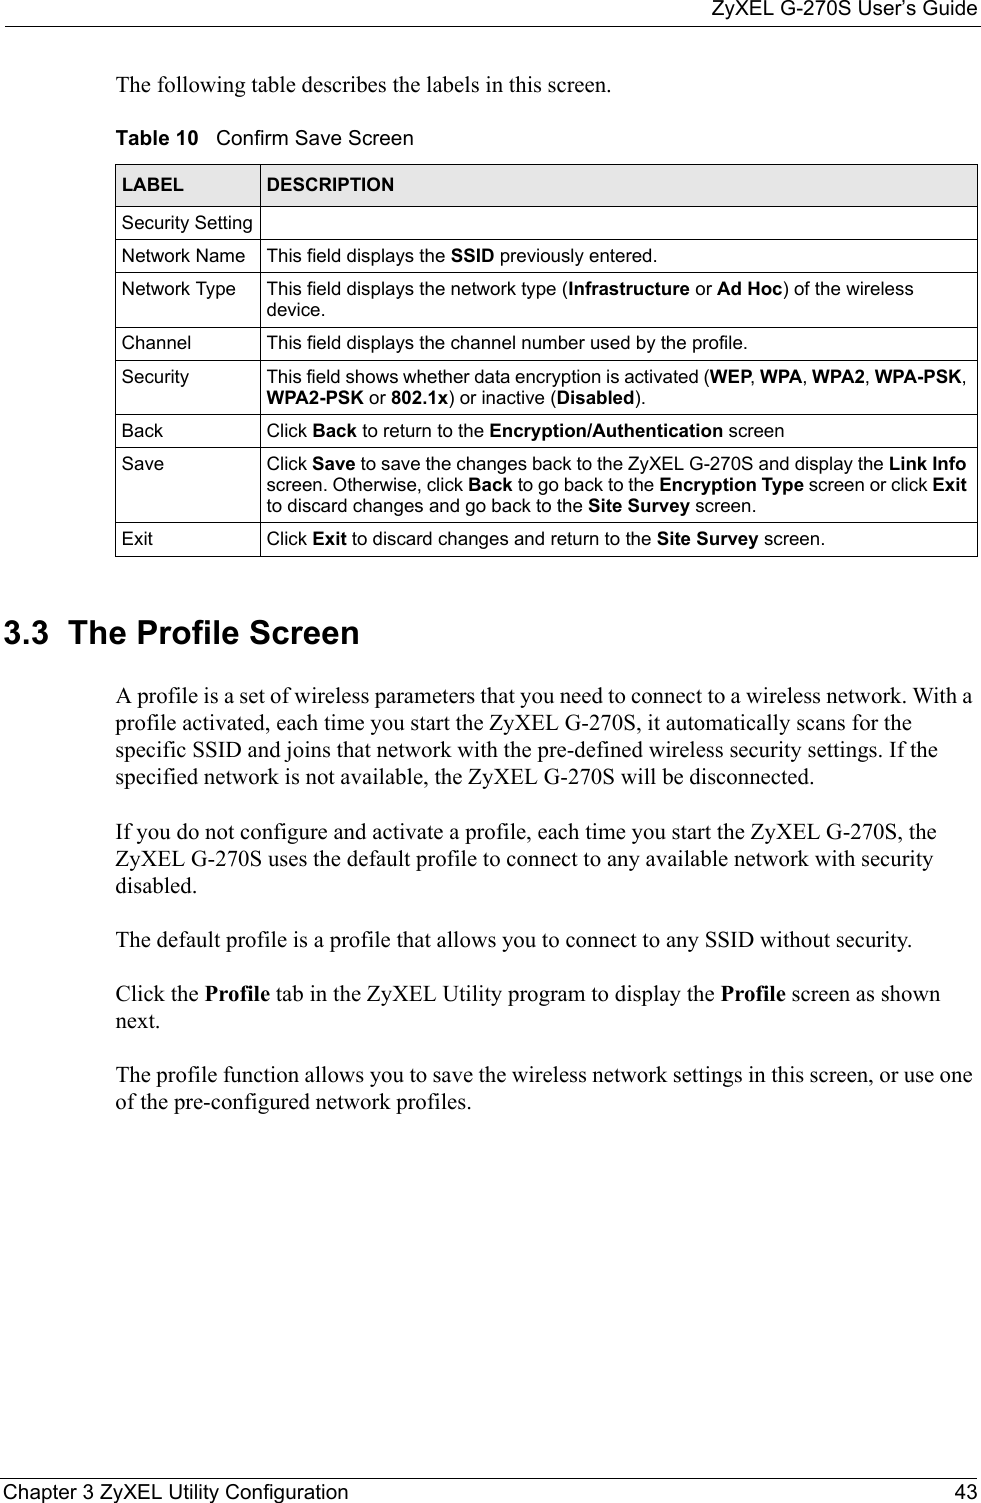 ZyXEL G-270S User’s GuideChapter 3 ZyXEL Utility Configuration 43The following table describes the labels in this screen.    3.3  The Profile Screen A profile is a set of wireless parameters that you need to connect to a wireless network. With a profile activated, each time you start the ZyXEL G-270S, it automatically scans for the specific SSID and joins that network with the pre-defined wireless security settings. If the specified network is not available, the ZyXEL G-270S will be disconnected.If you do not configure and activate a profile, each time you start the ZyXEL G-270S, the ZyXEL G-270S uses the default profile to connect to any available network with security disabled. The default profile is a profile that allows you to connect to any SSID without security.Click the Profile tab in the ZyXEL Utility program to display the Profile screen as shown next.The profile function allows you to save the wireless network settings in this screen, or use one of the pre-configured network profiles.Table 10   Confirm Save ScreenLABEL DESCRIPTIONSecurity SettingNetwork Name This field displays the SSID previously entered.Network Type This field displays the network type (Infrastructure or Ad Hoc) of the wireless device.Channel This field displays the channel number used by the profile.Security This field shows whether data encryption is activated (WEP, WPA, WPA2, WPA-PSK, WPA2-PSK or 802.1x) or inactive (Disabled).Back Click Back to return to the Encryption/Authentication screenSave Click Save to save the changes back to the ZyXEL G-270S and display the Link Info screen. Otherwise, click Back to go back to the Encryption Type screen or click Exit to discard changes and go back to the Site Survey screen.Exit Click Exit to discard changes and return to the Site Survey screen.